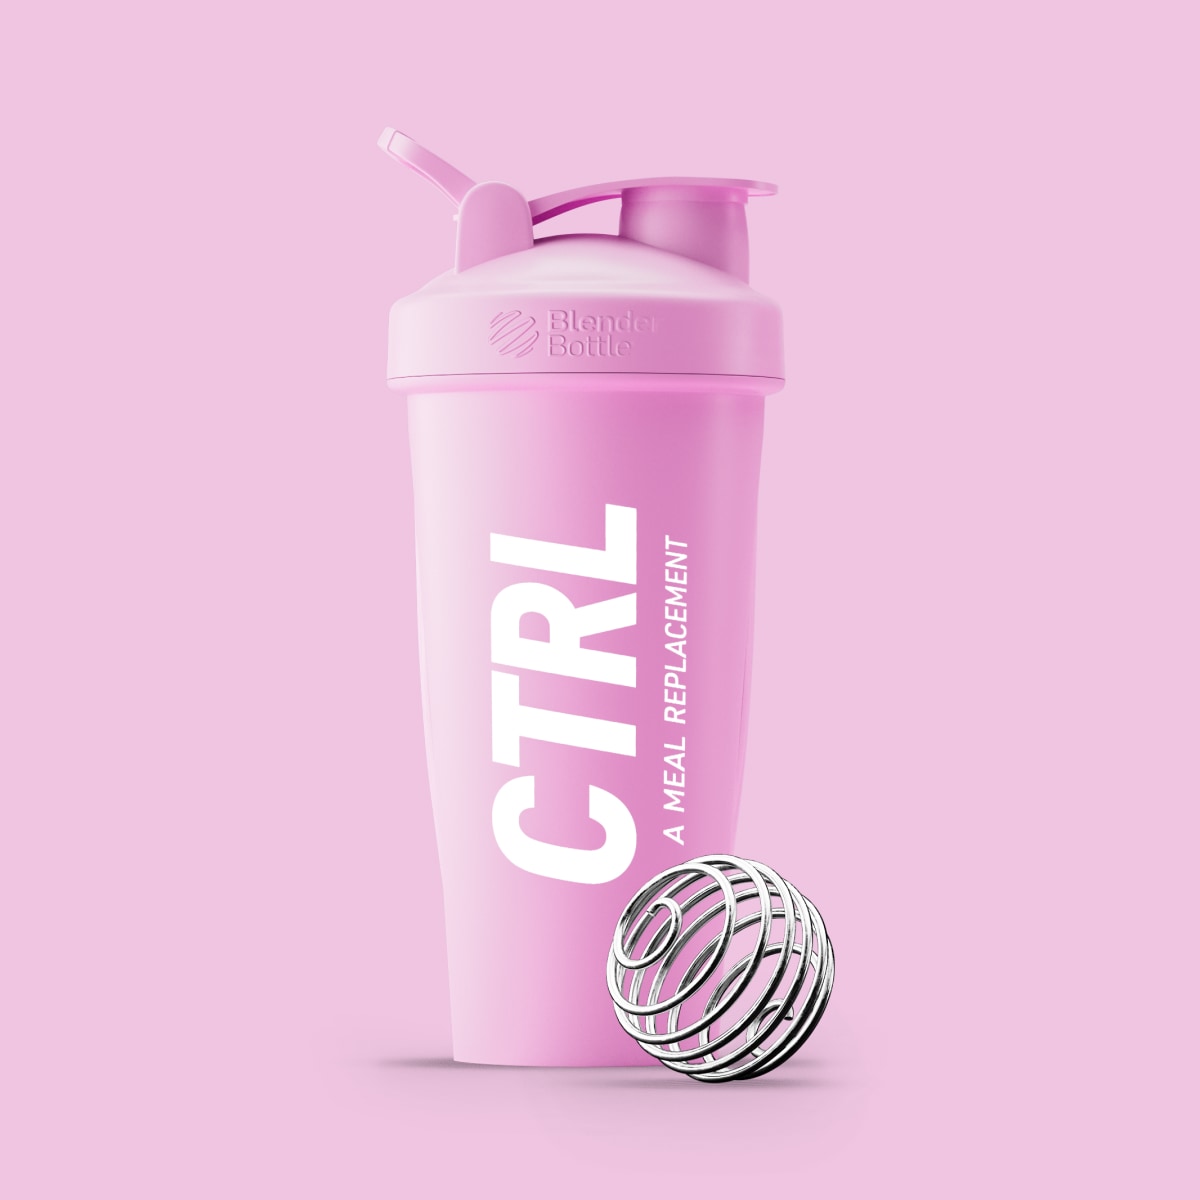 Shaker Cup (Light Pink) by S'moo - Ideal for Shakes, Smoothies